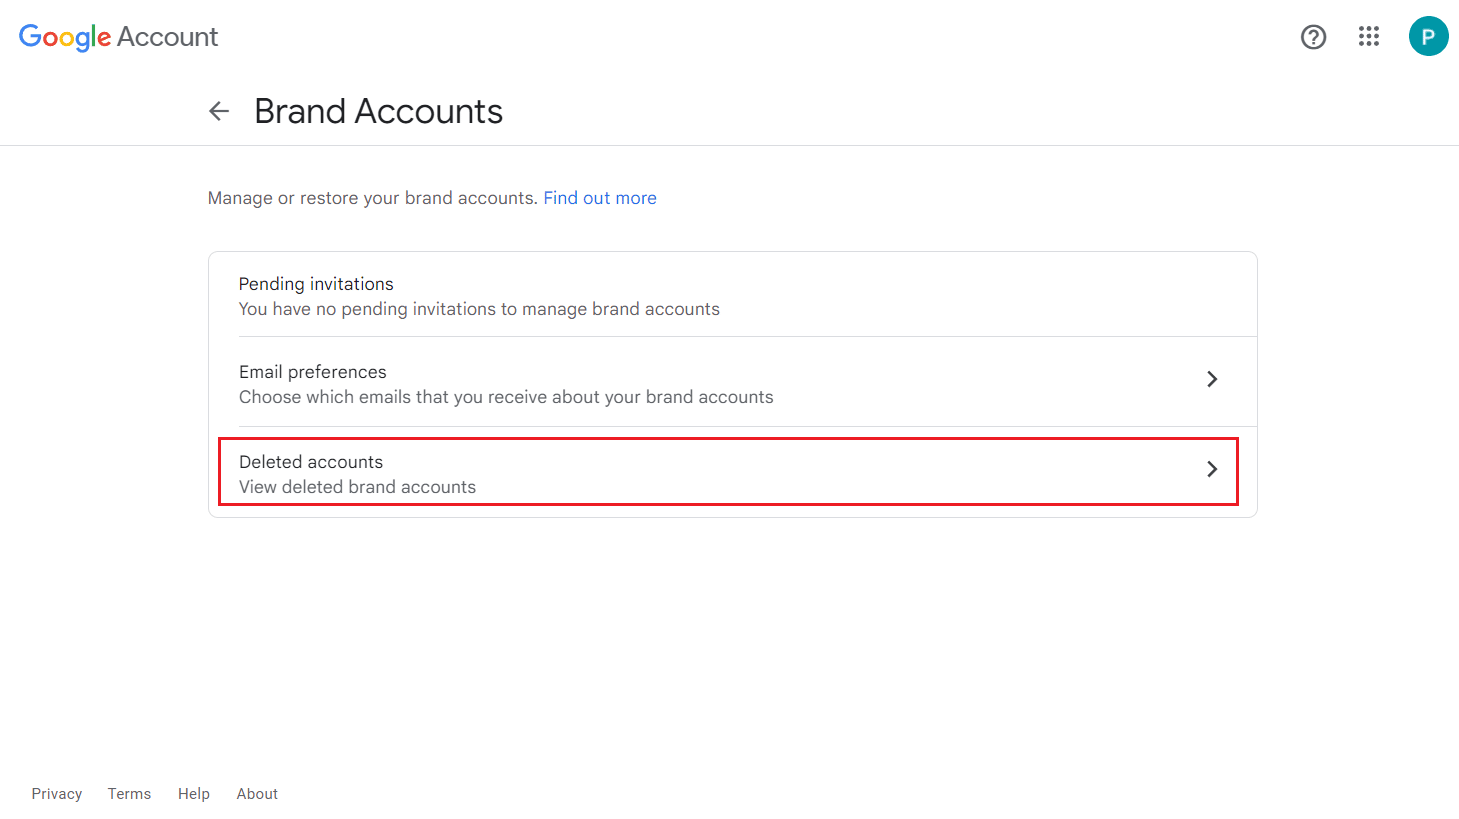 click on the Deleted accounts option